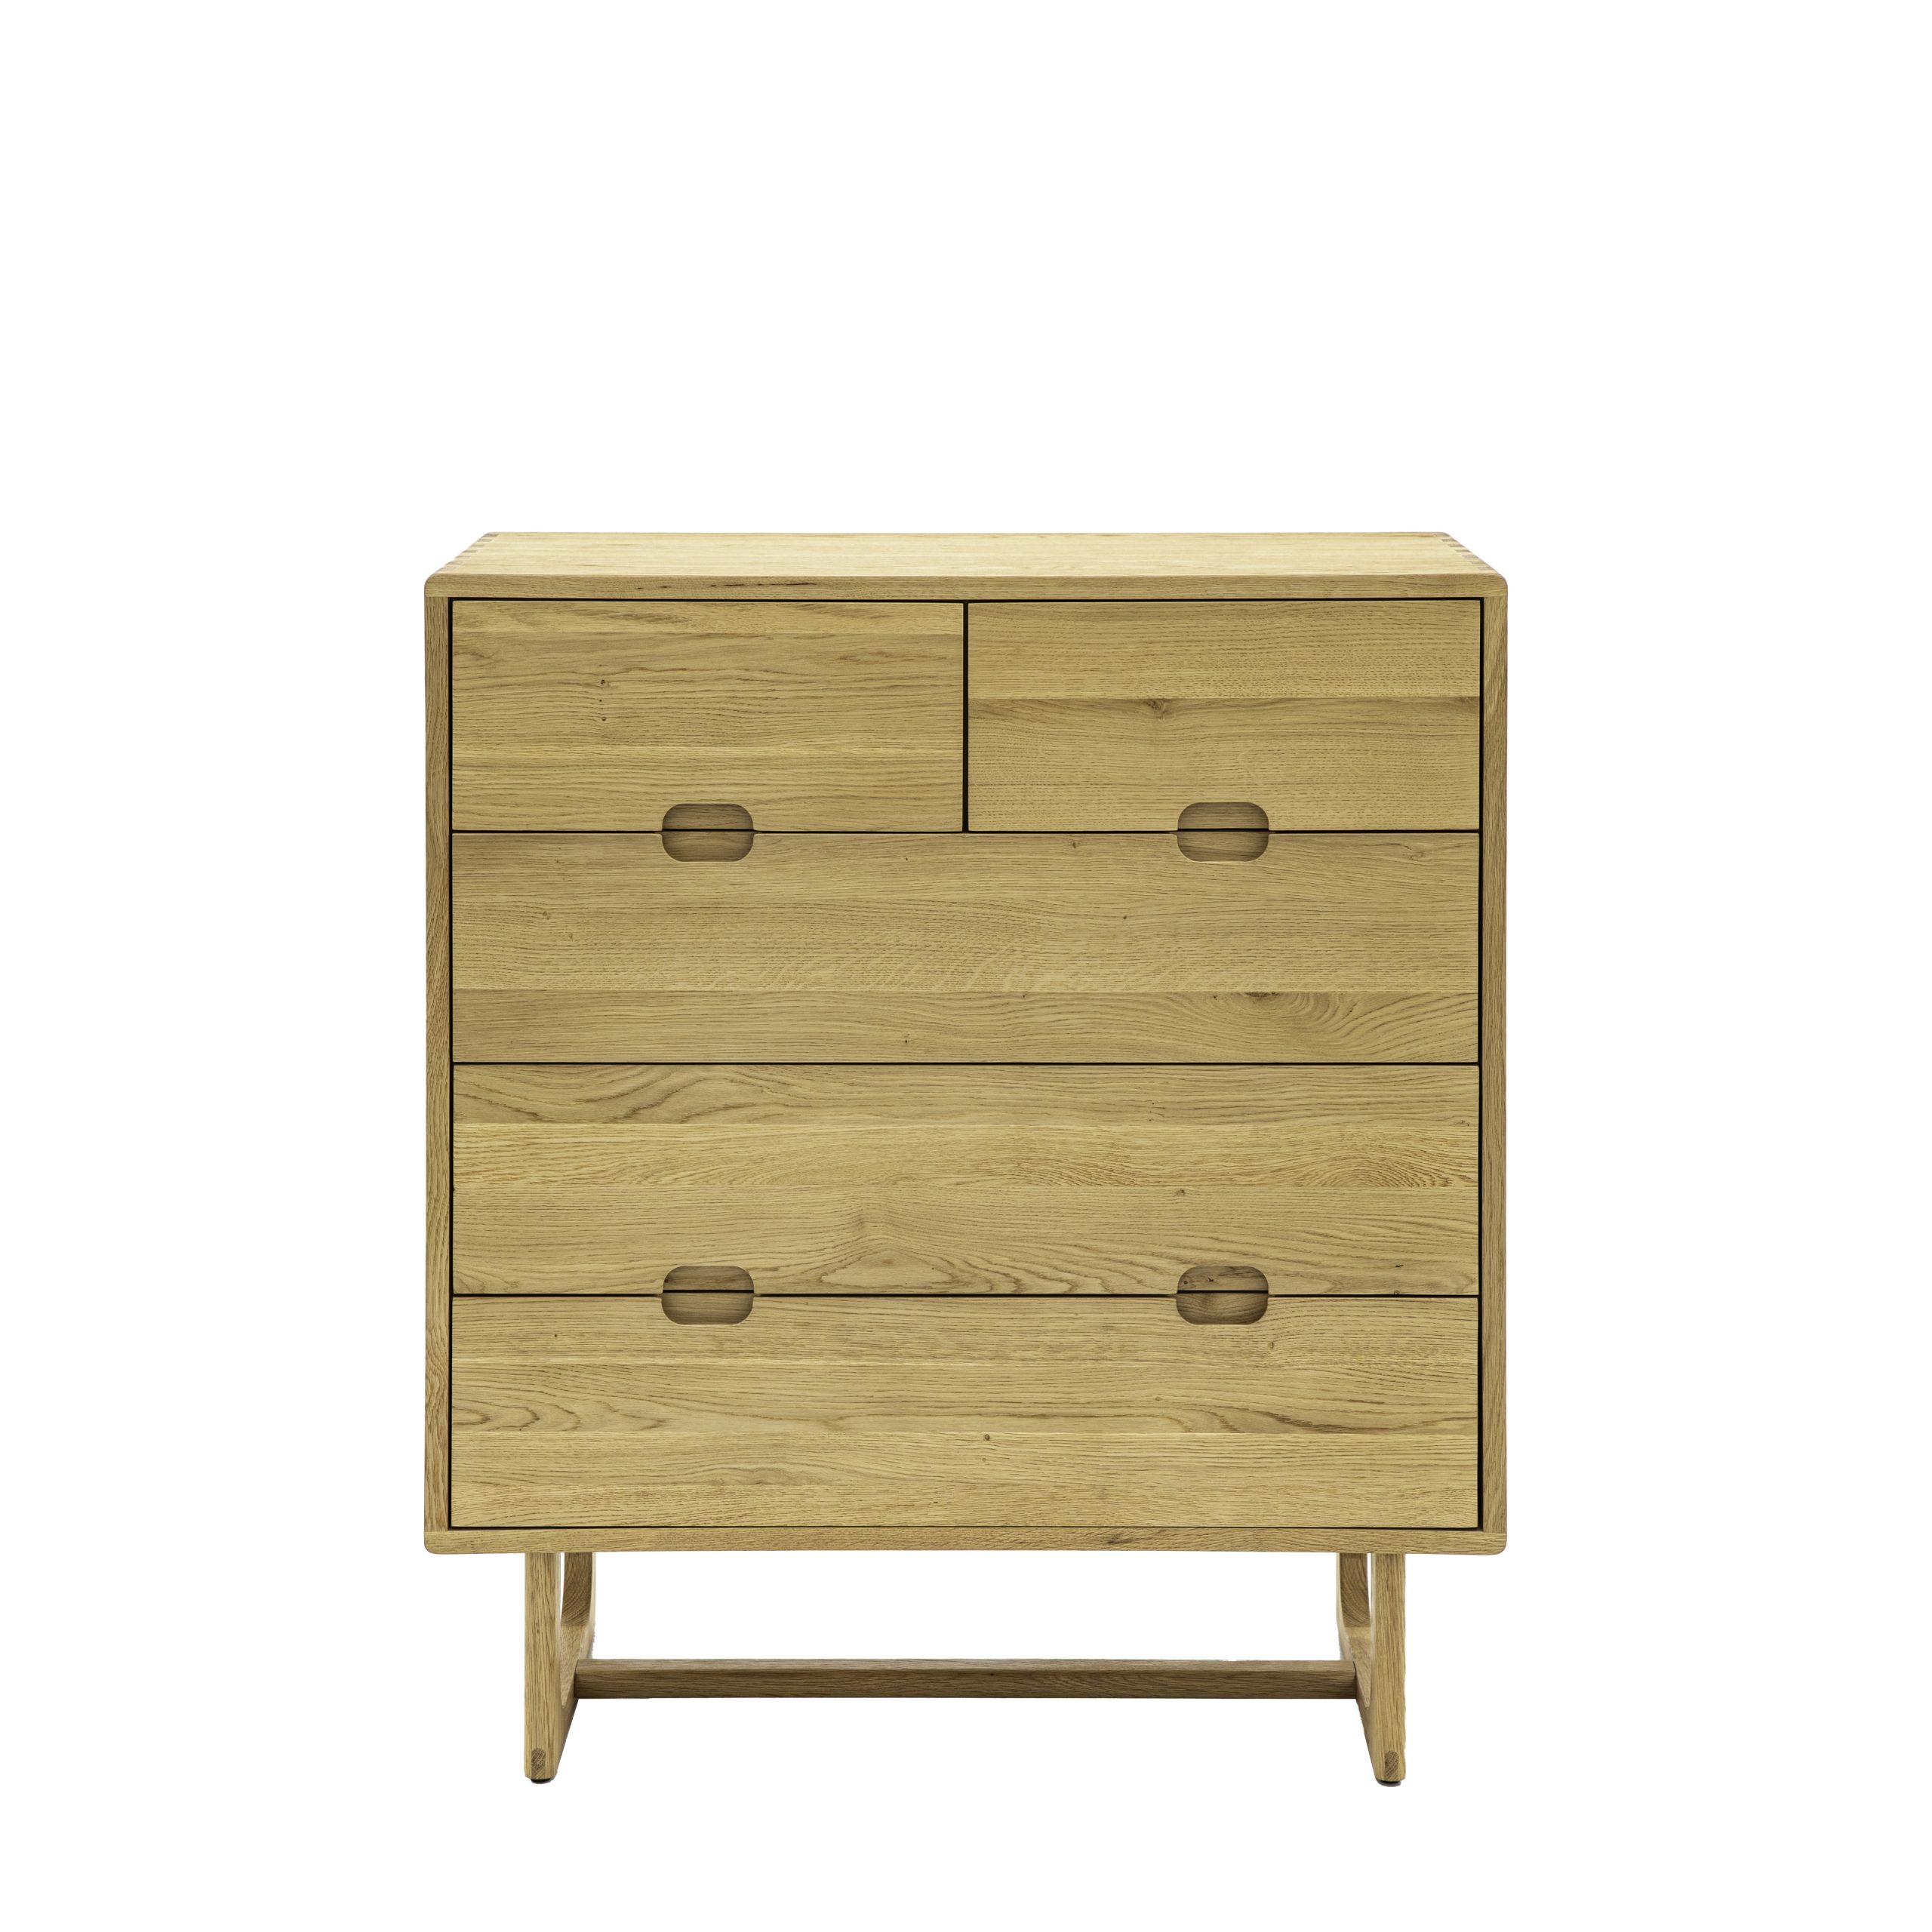 Gallery Direct Craft 5 Drawer Chest Natural